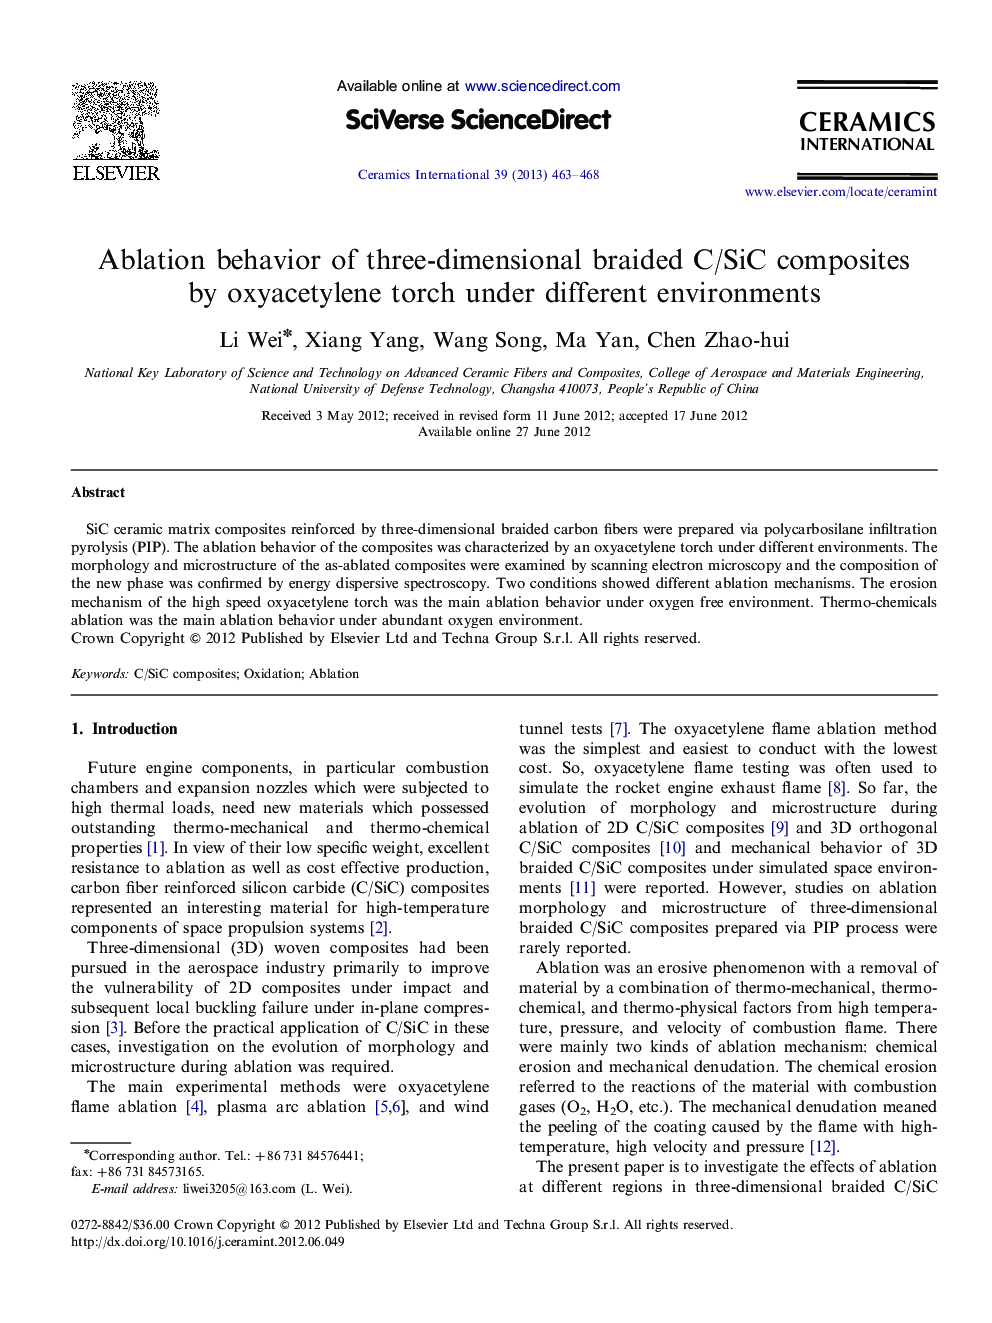 Ablation behavior of three-dimensional braided C/SiC composites by oxyacetylene torch under different environments